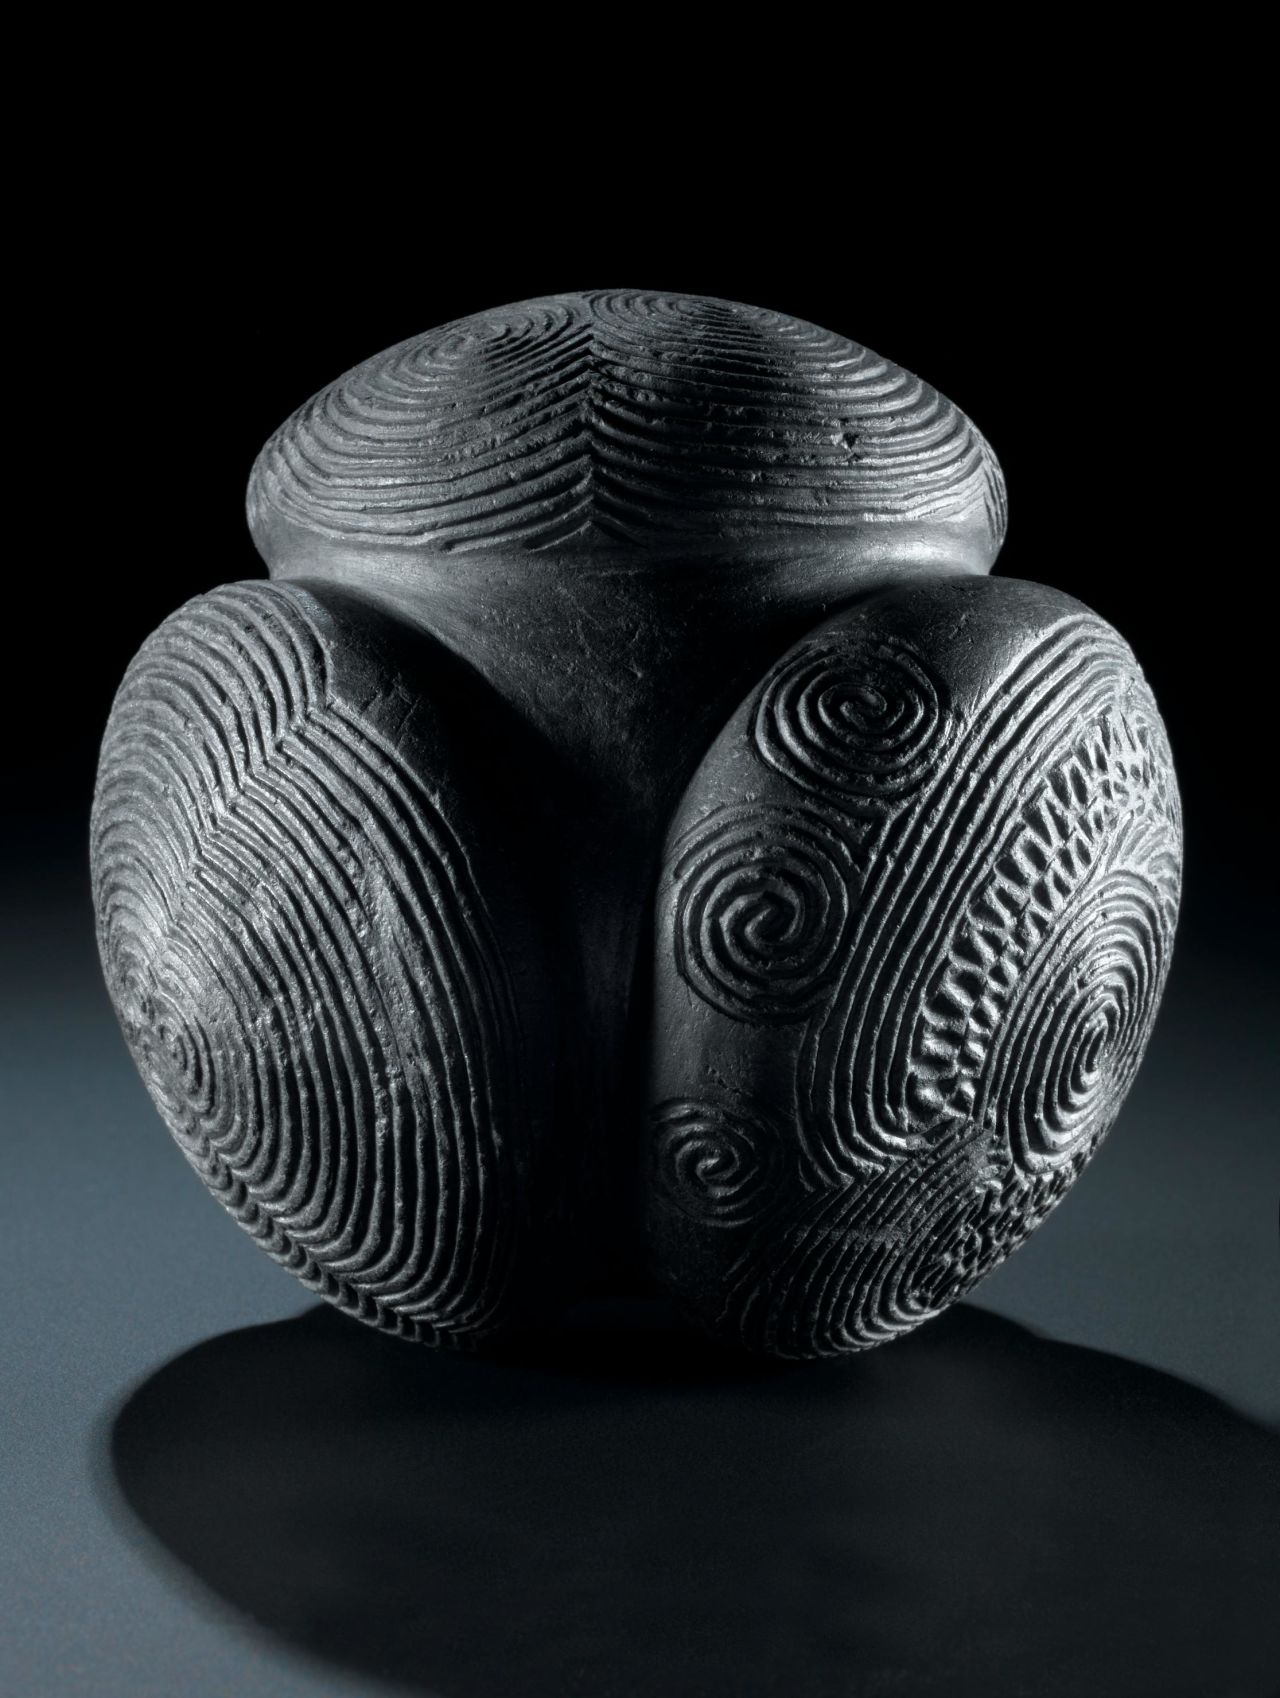 More than 500 of these 5,000-year-old carved stone balls have been discovered, mostly in Scotland, but their purpose remains a mystery.